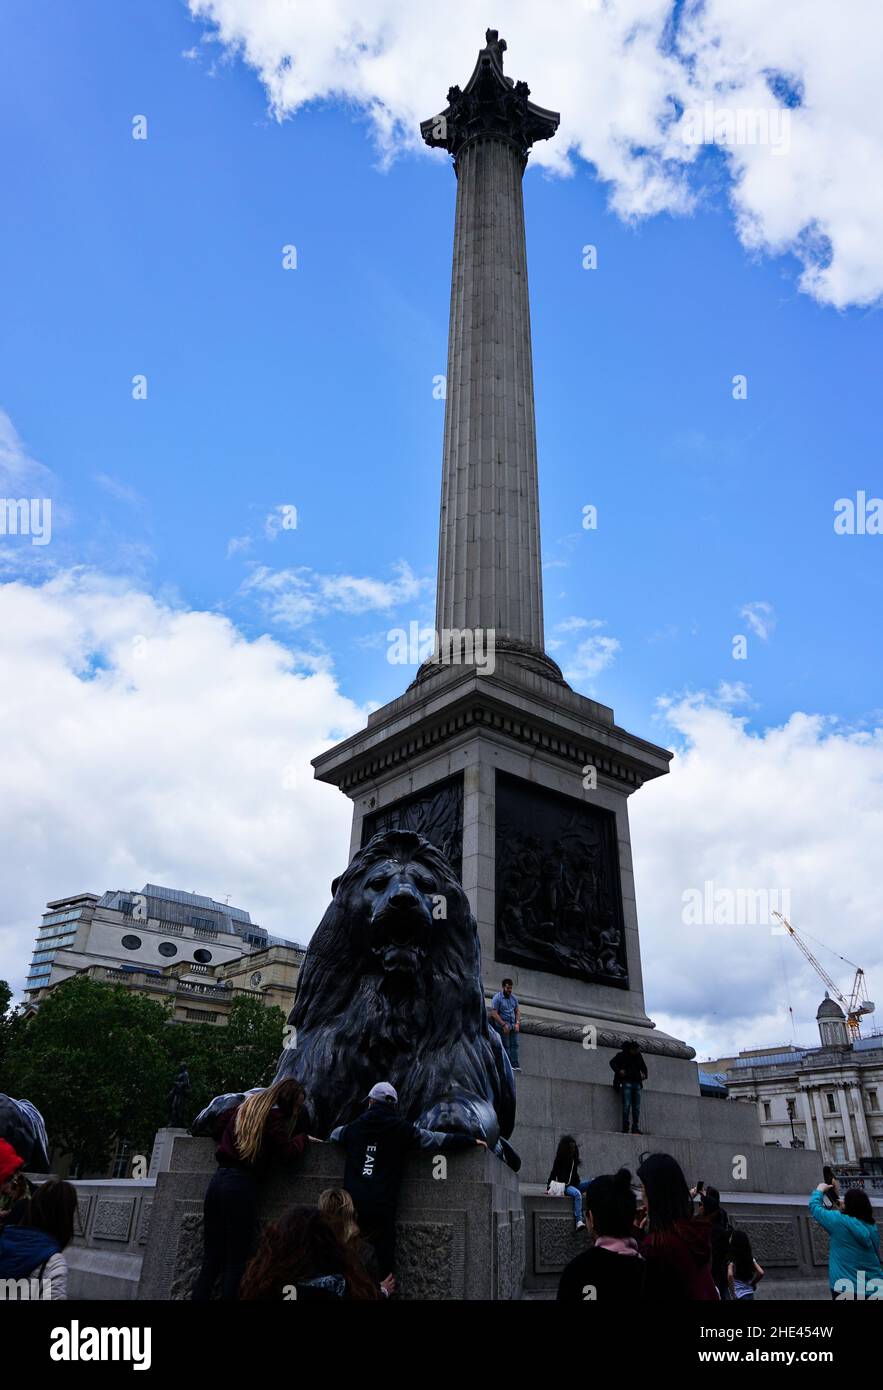 Nelson's Column and Trafalgar Square in Westminster, Central London, England. Stock Photo